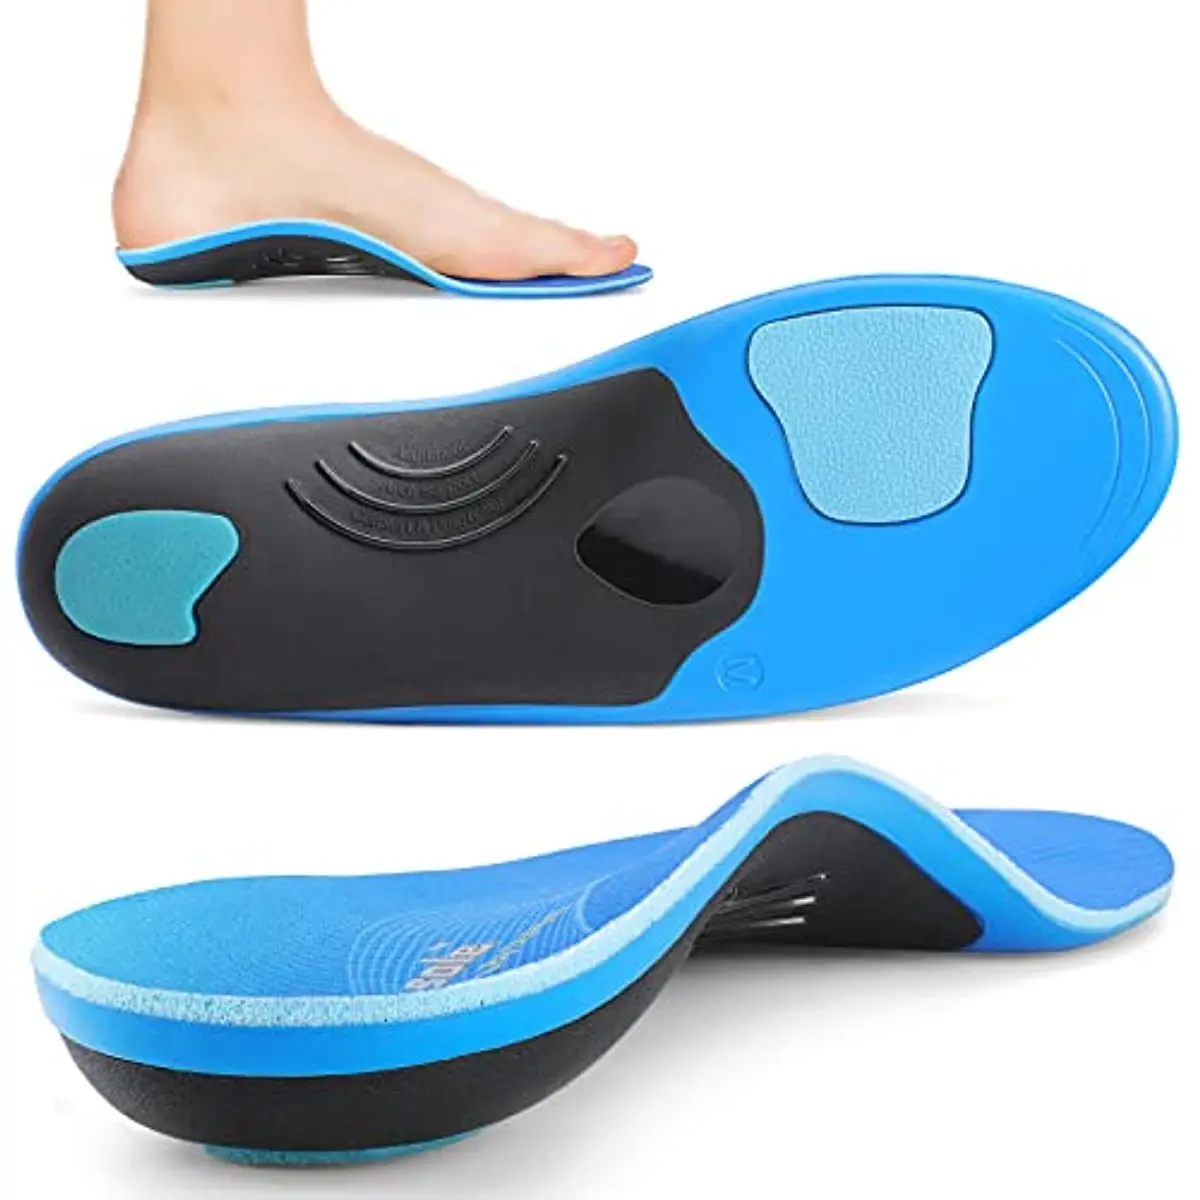 pcssole-standing-all-day-arch-support-insolesplantar-fasciitis-heavy-duty-orthotic-insoleflat-feetheel-paingel-air-insole